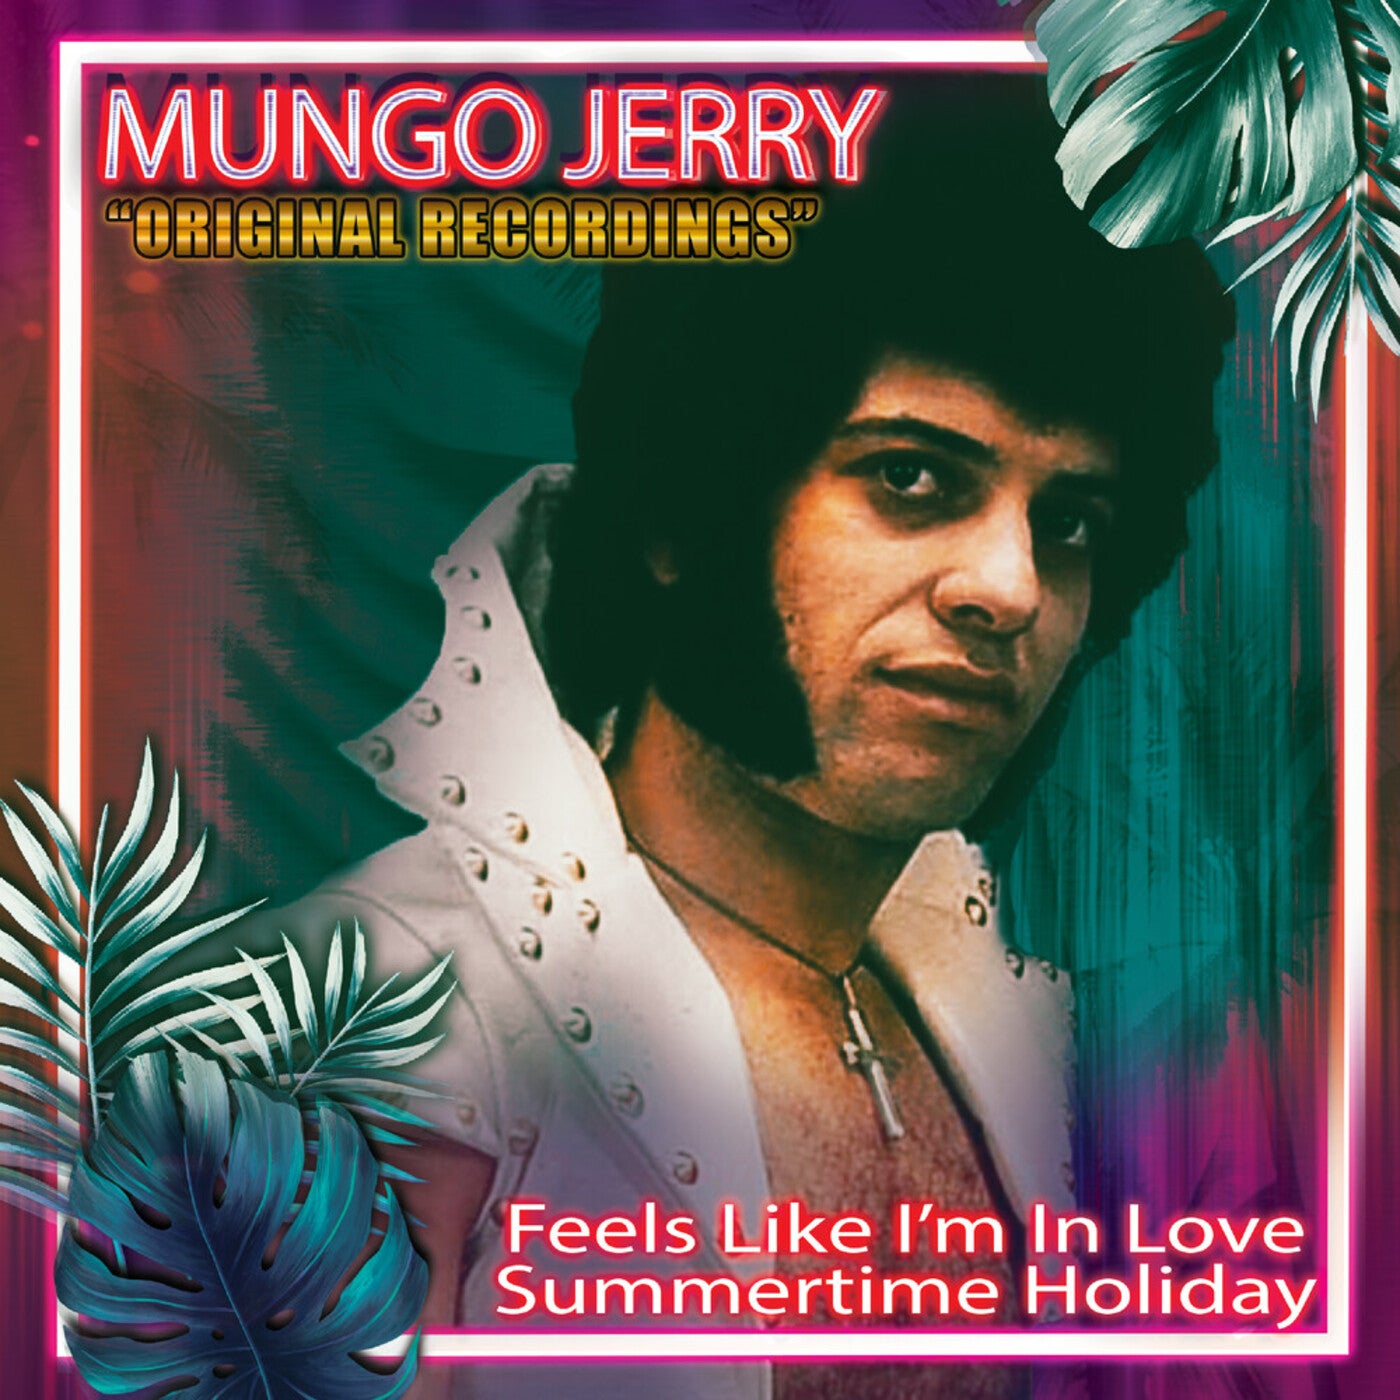 Mungo Jerry. Mungo jerry in the summertime